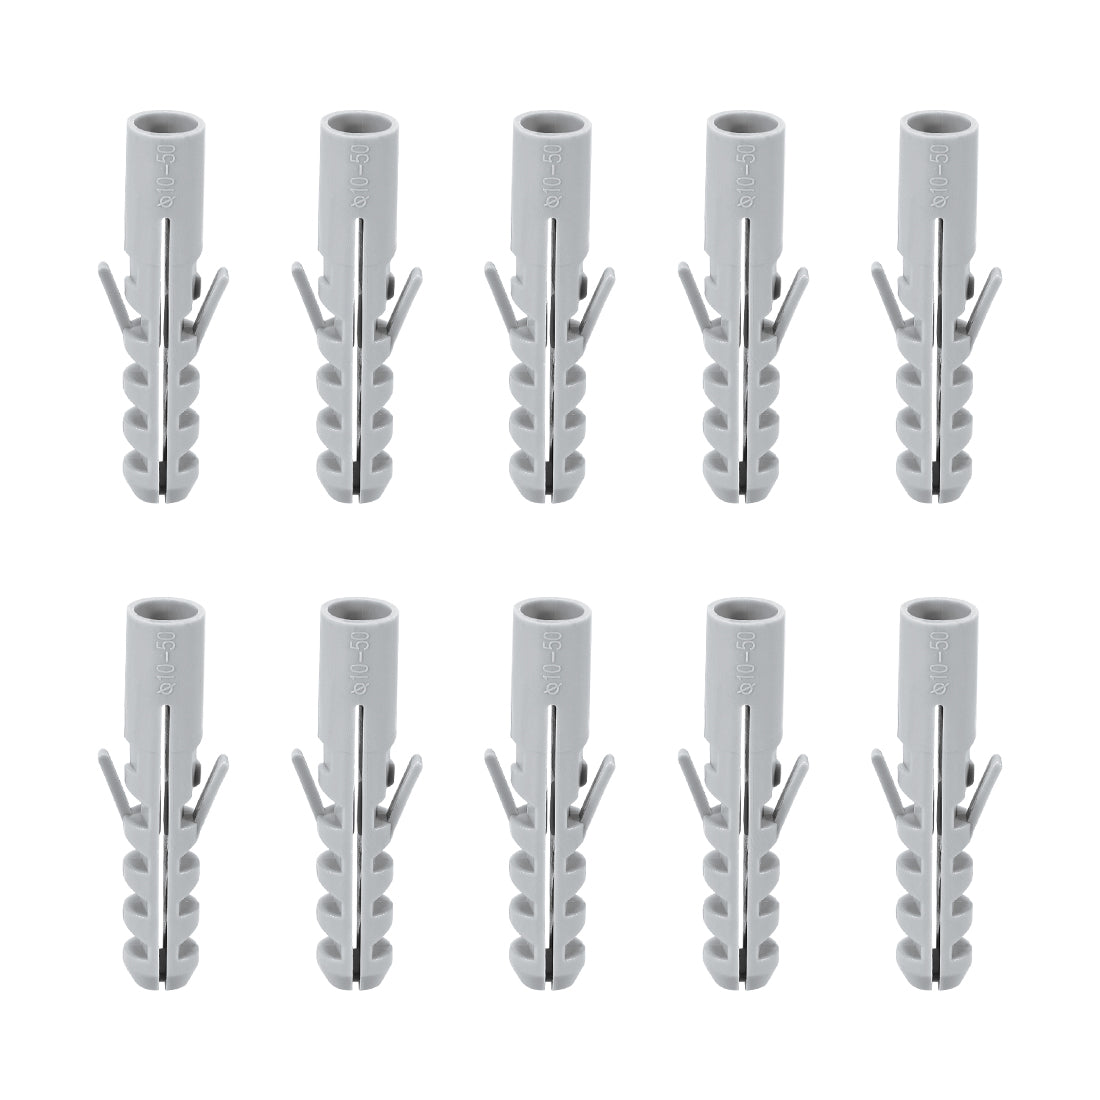 uxcell Uxcell 10x50mm Plastic Expansion Tube Bolts Column Frame Fixings Gray 50pcs